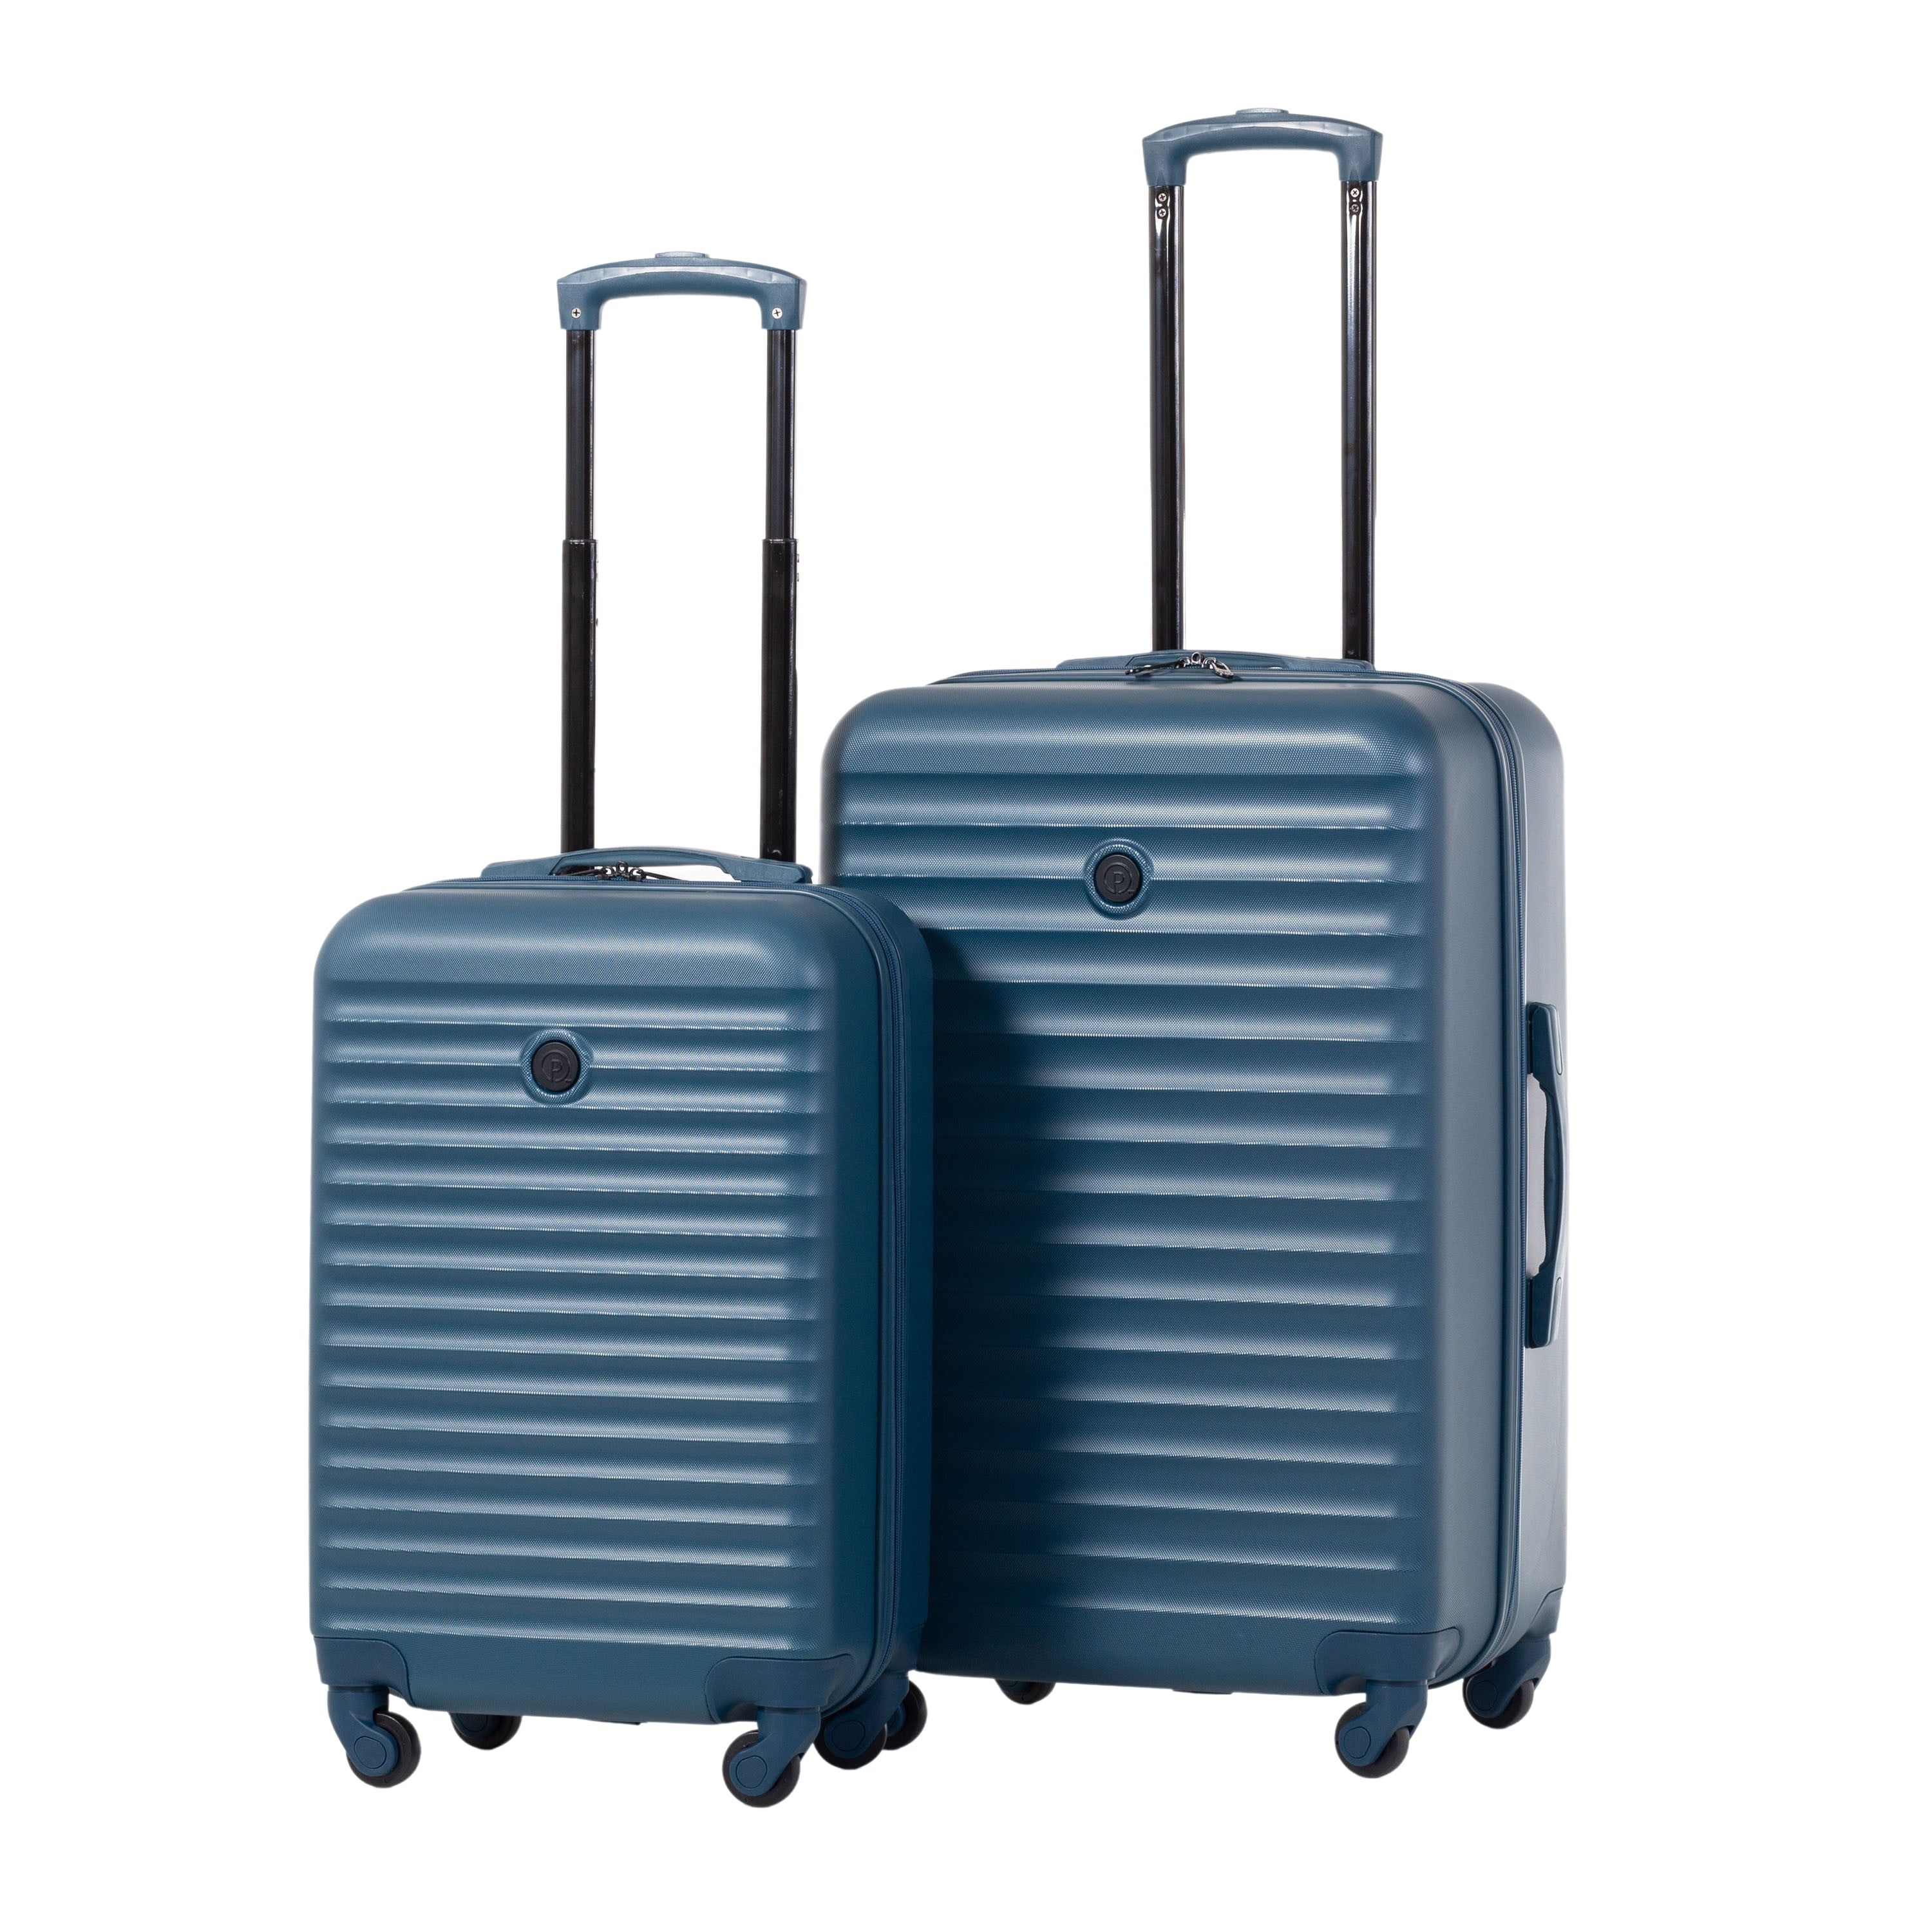 Protege 2 piece Hardside Luggage Set, 20" Carry-on and 25" Checked Upright Spinner Suitcase, Blue | Walmart (US)